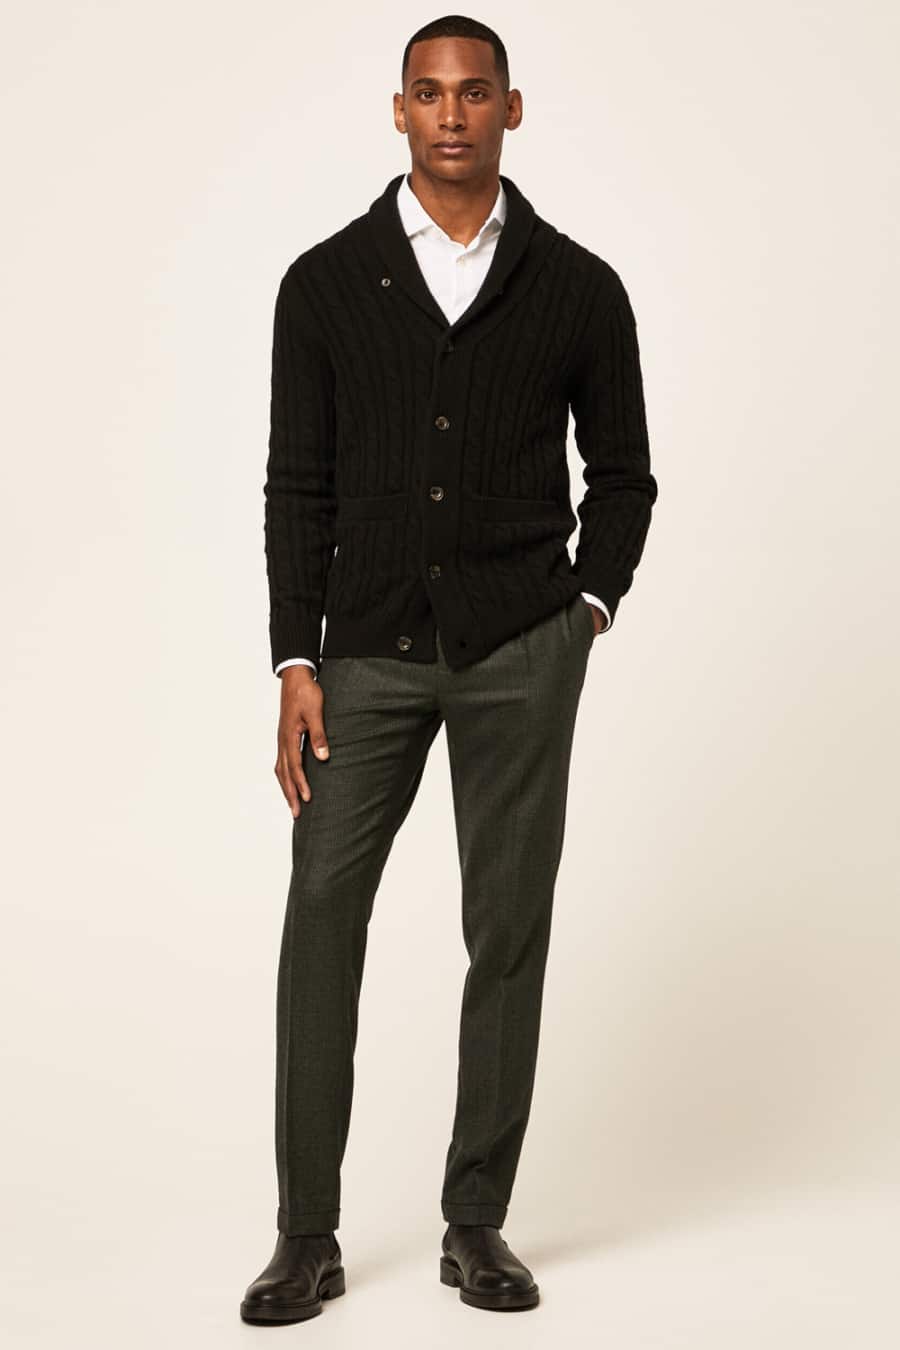 Men's grey trousers, white shirt, black shawl collar cardigan and leather Chelsea boots outfit